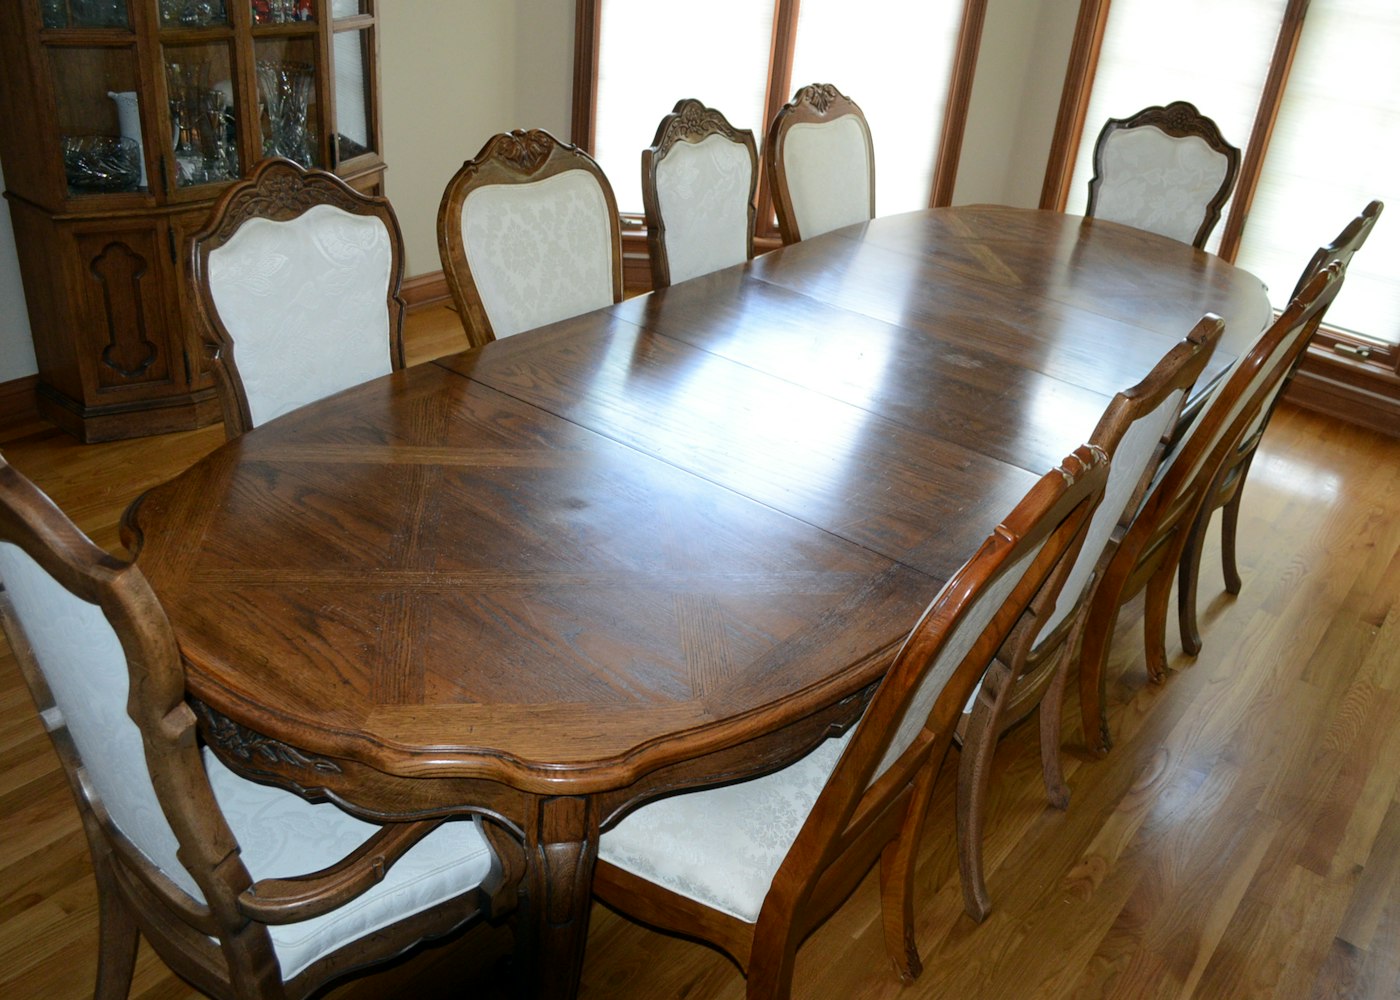 Thomasville French Provincial Style Dining Table and Chairs | EBTH